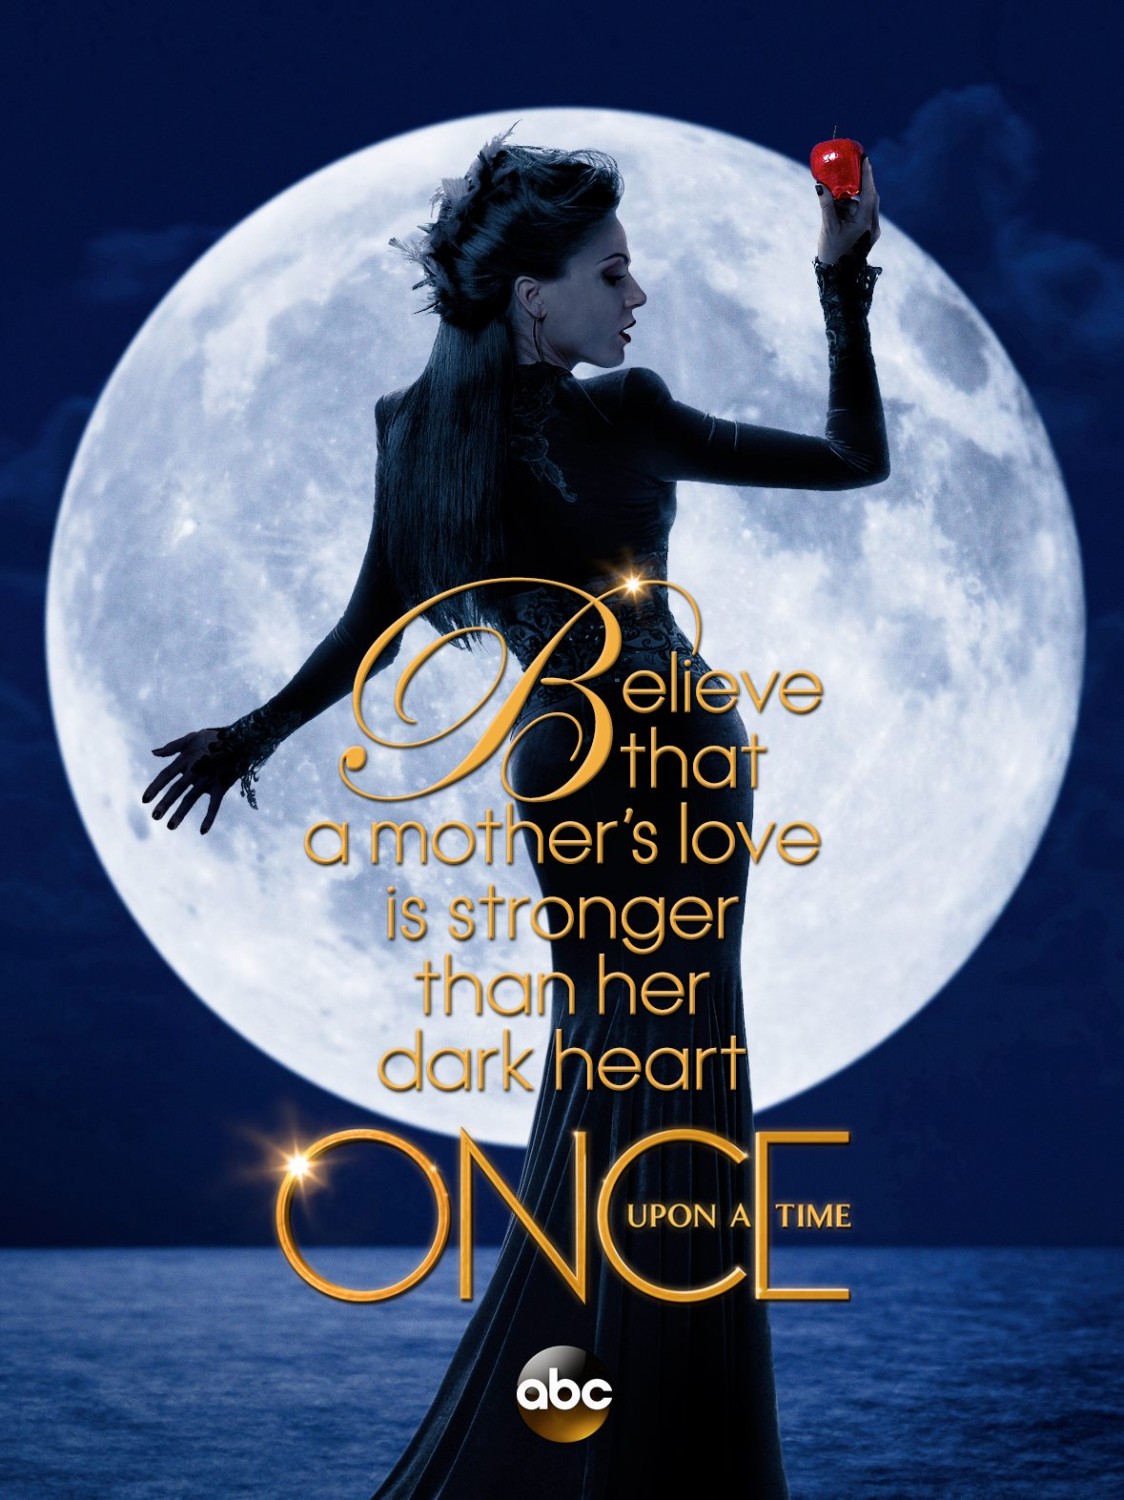 Extra Large TV Poster Image for Once Upon a Time (#10 of 23)